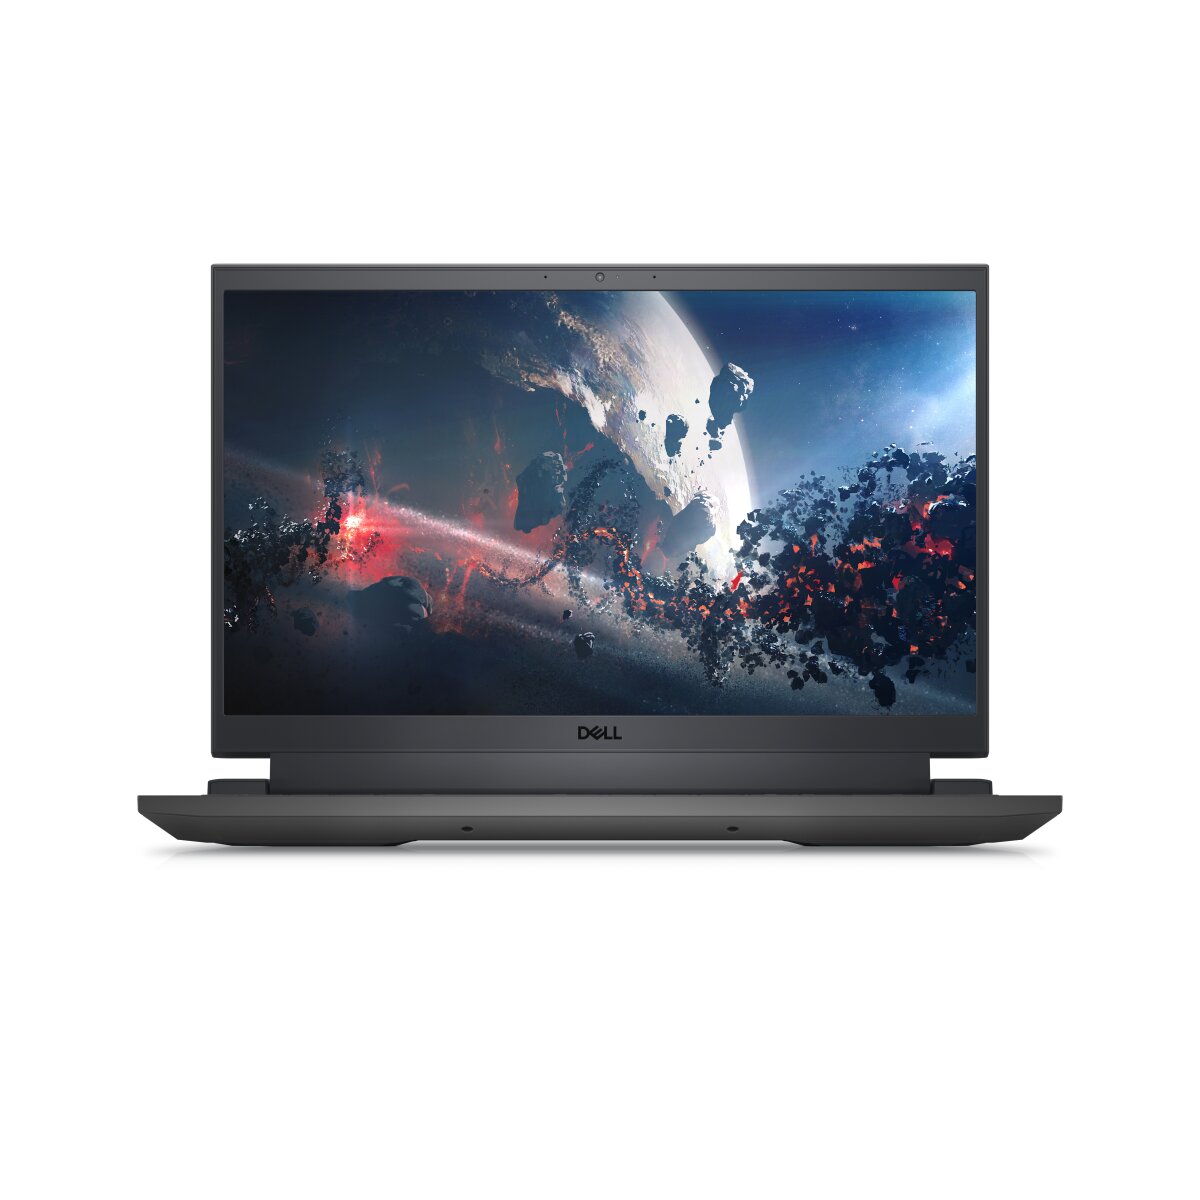 DELL G5 5520 MWNJM image gallery 1